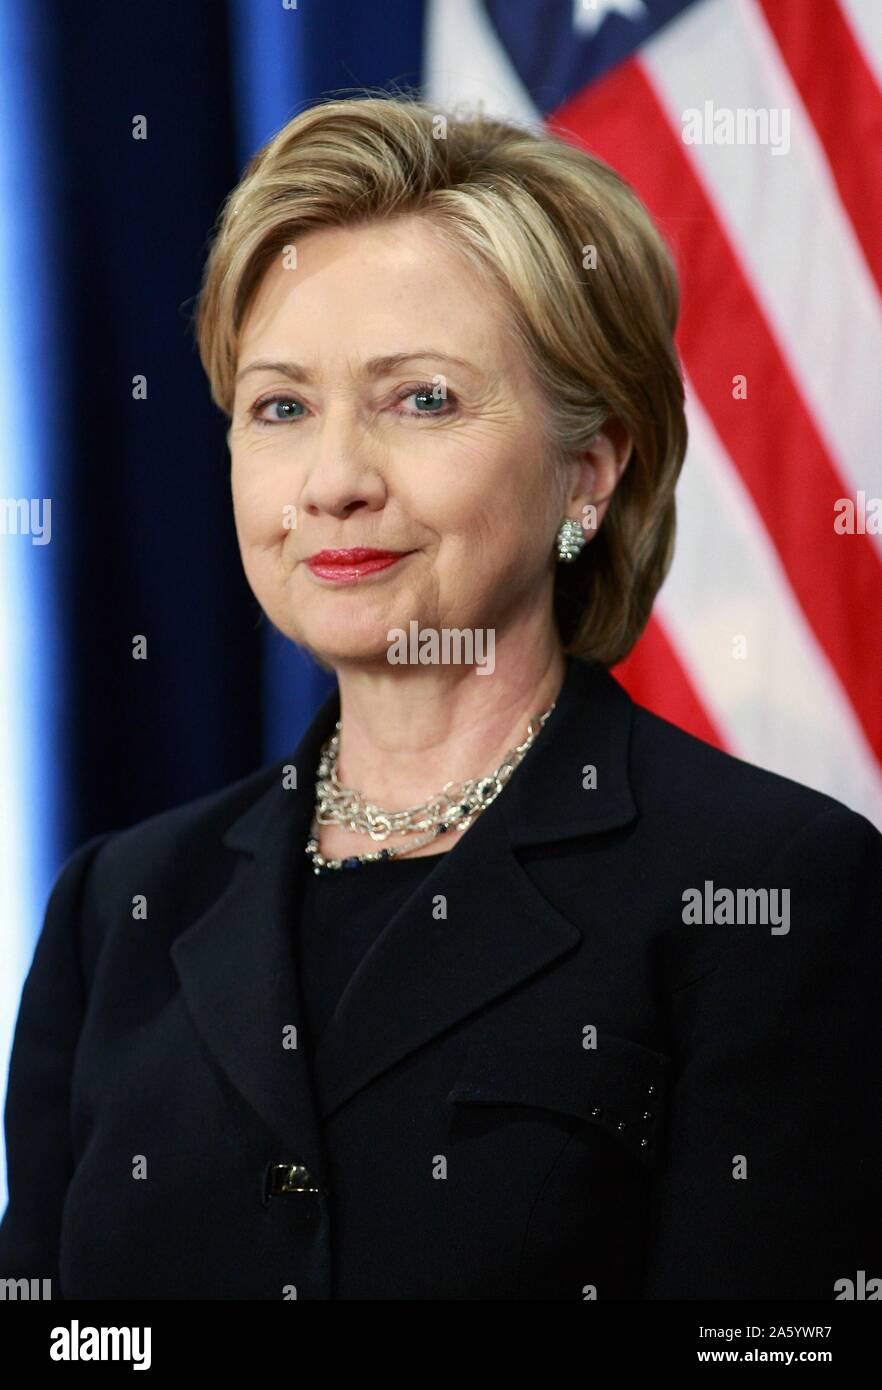 Photographic portrait of Hillary Clinton (1947-) American politician, Senator and former Secretary of State in the administration of President Barack Obama. Dated 2009 Stock Photo